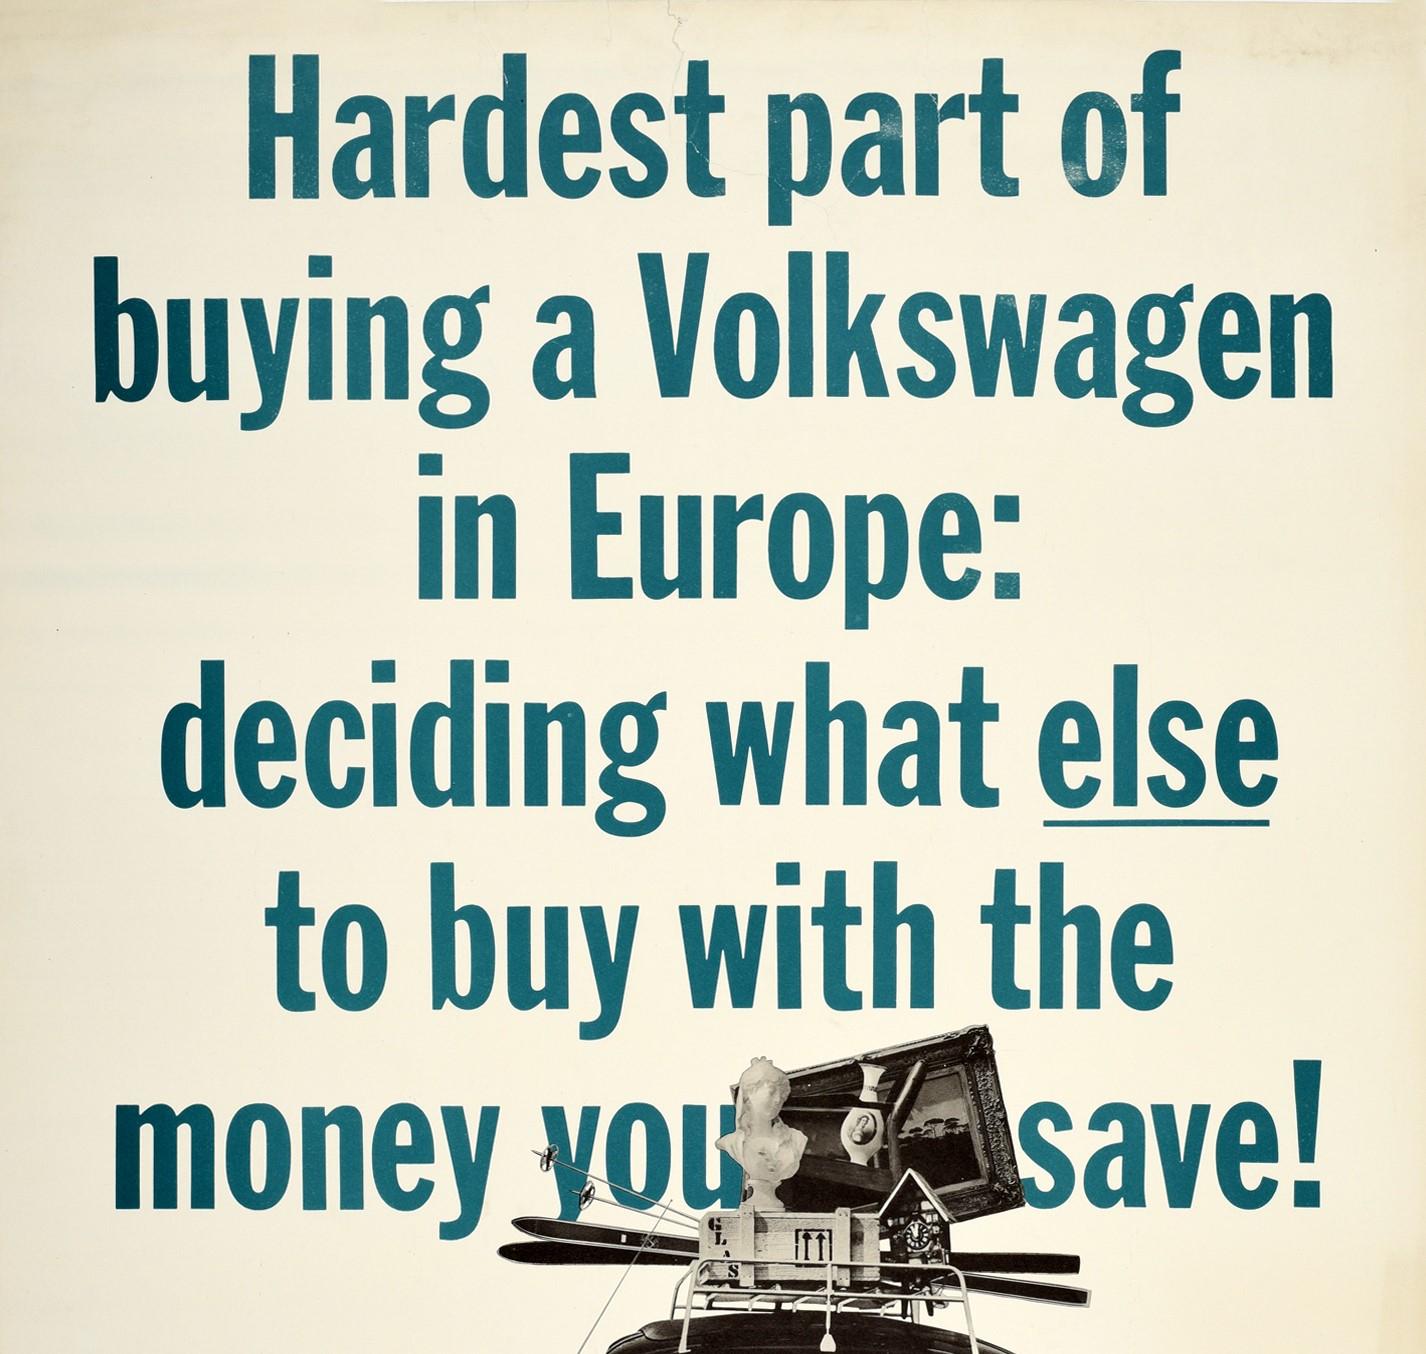 Original vintage car dealer showroom advertising poster for Volkswagen Beetle - Hardest part of buying a Volkswagen in Europe: deciding what else to buy with the money you save! - featuring a great black and white design depicting a smiling man